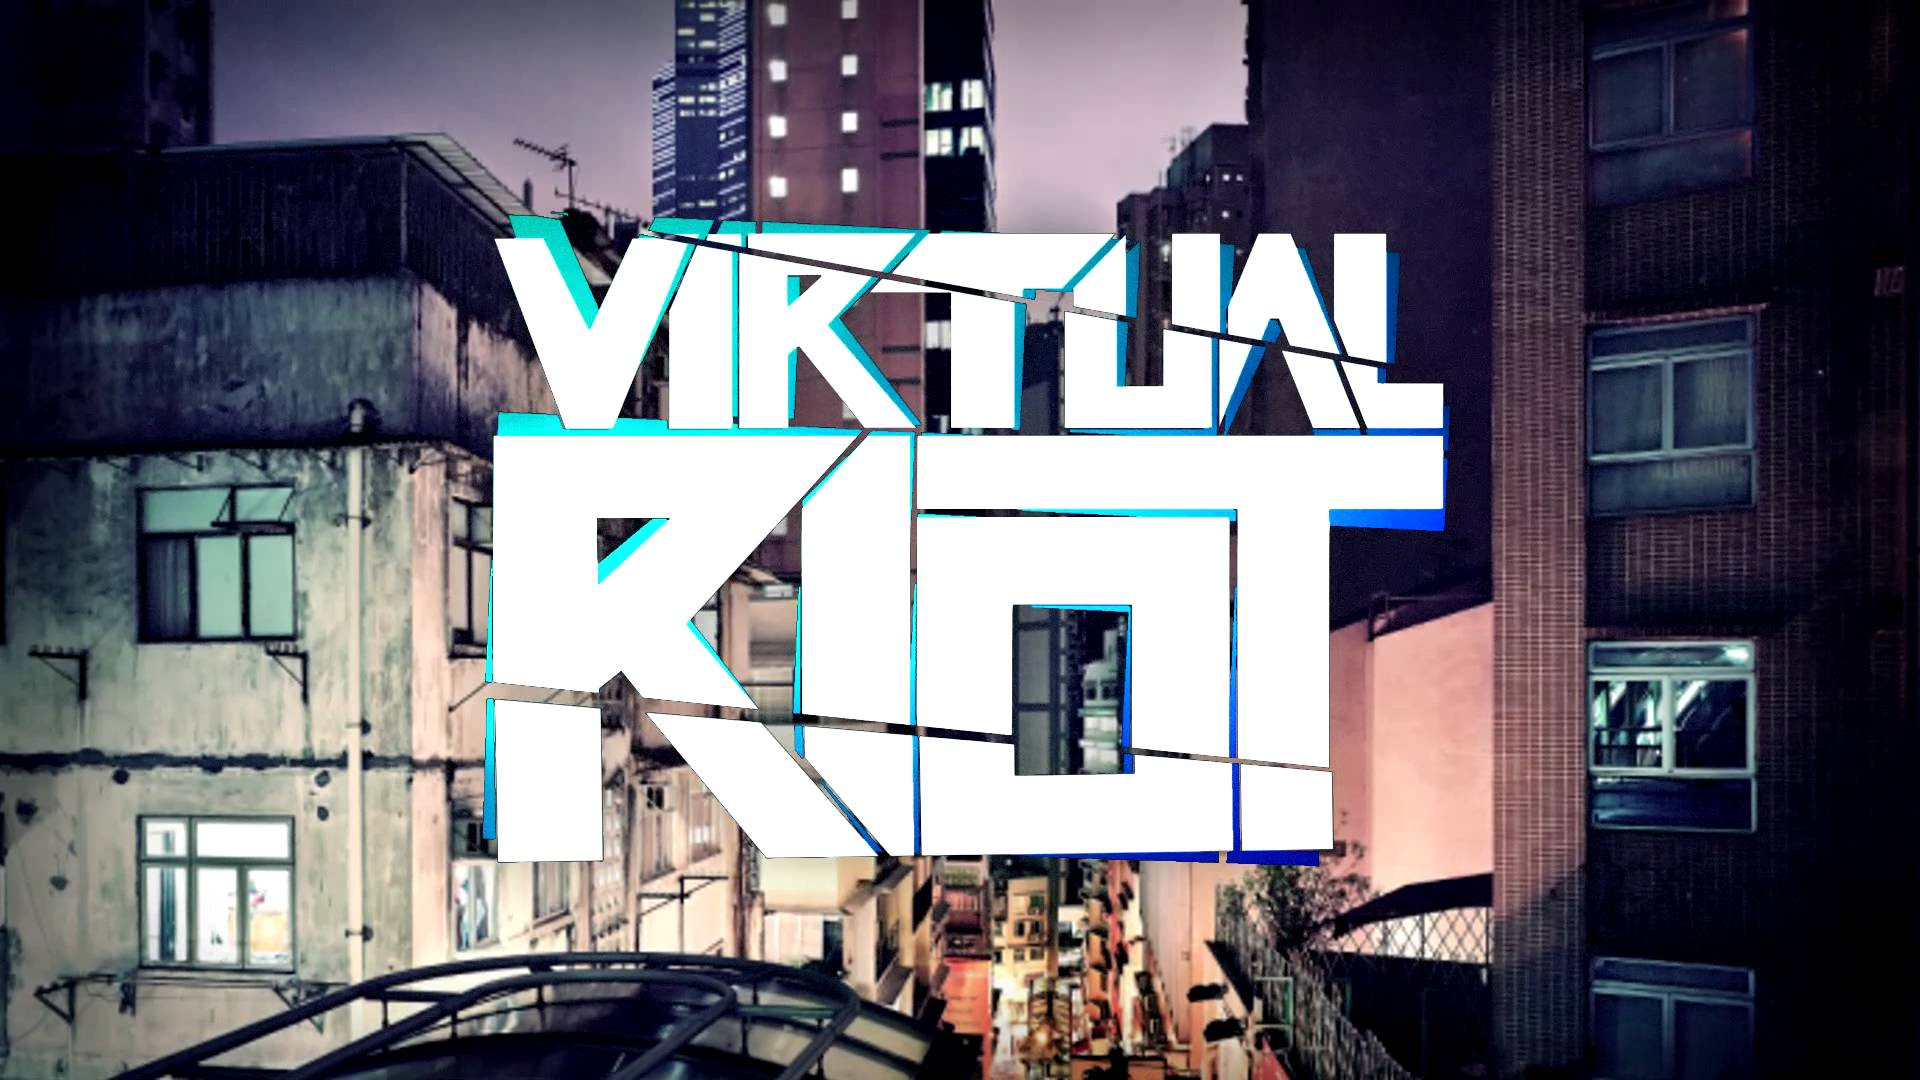 1920x1080 The 5 Best Remixes of 'We're Not Alone' by Virtual Riot [Free Downloads] | Your EDM